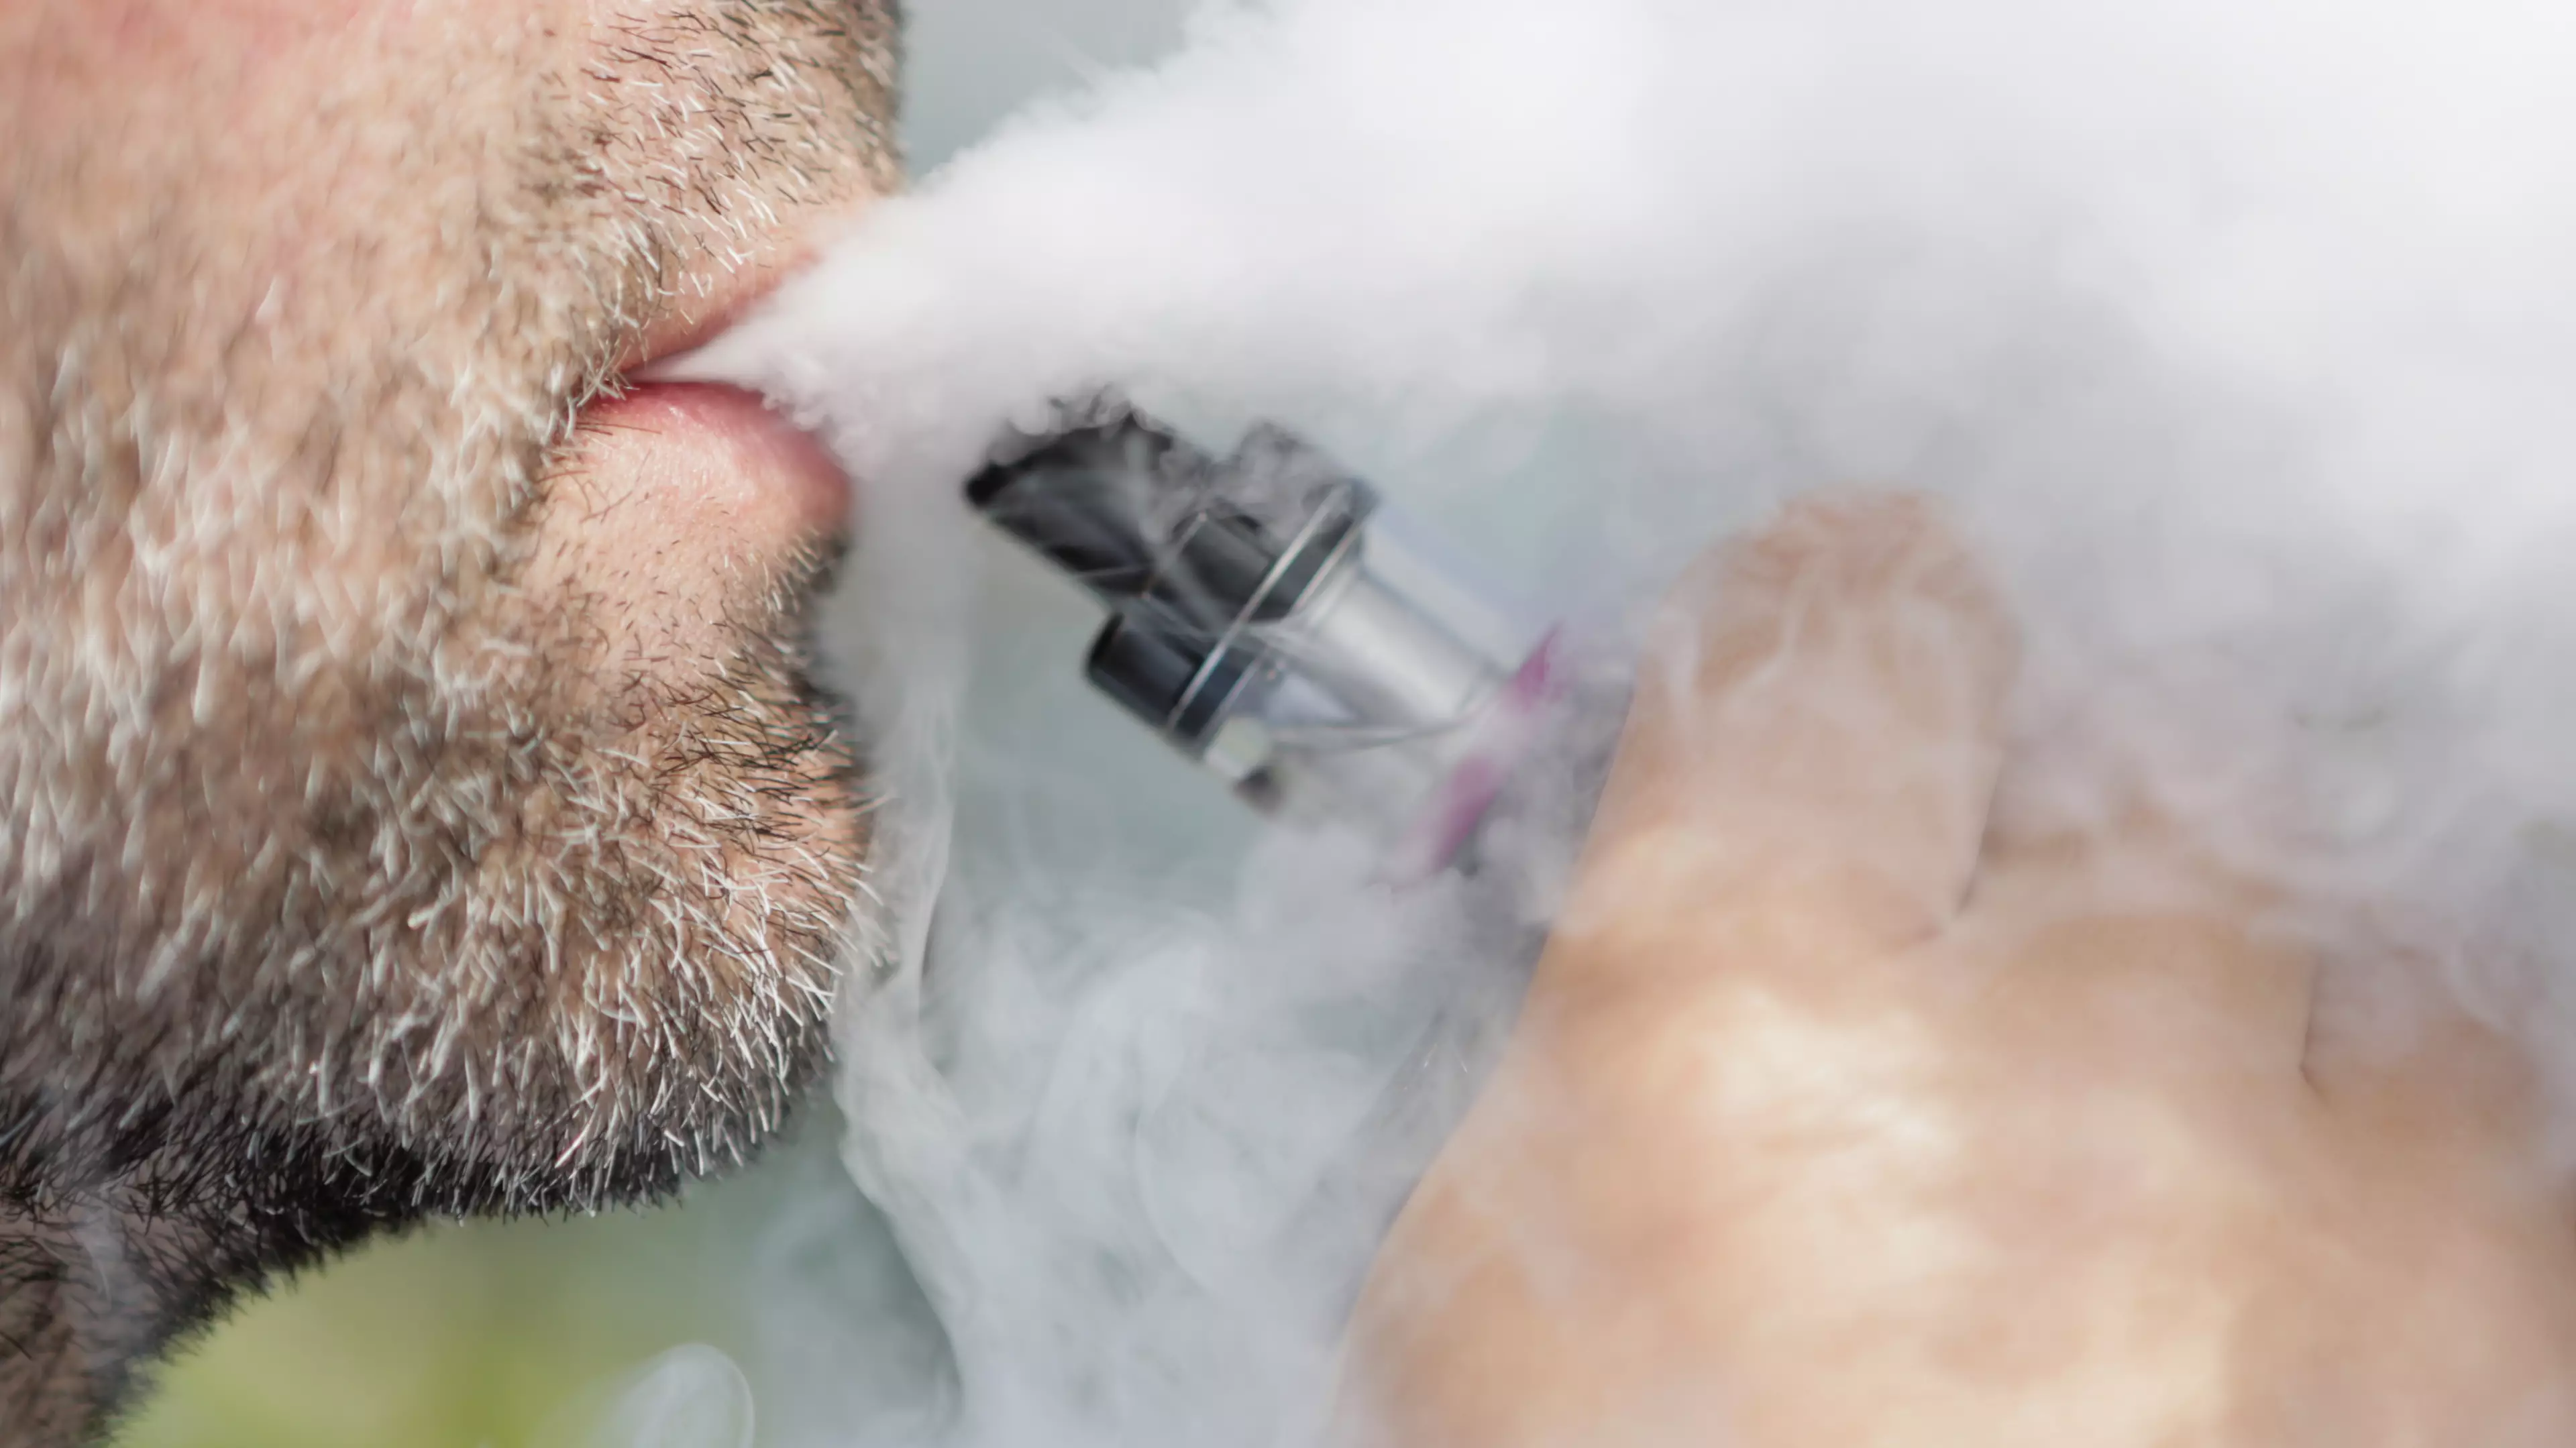 Australian Government Is Banning Nearly All Importation Of E-Cigarette Nicotine From July 1